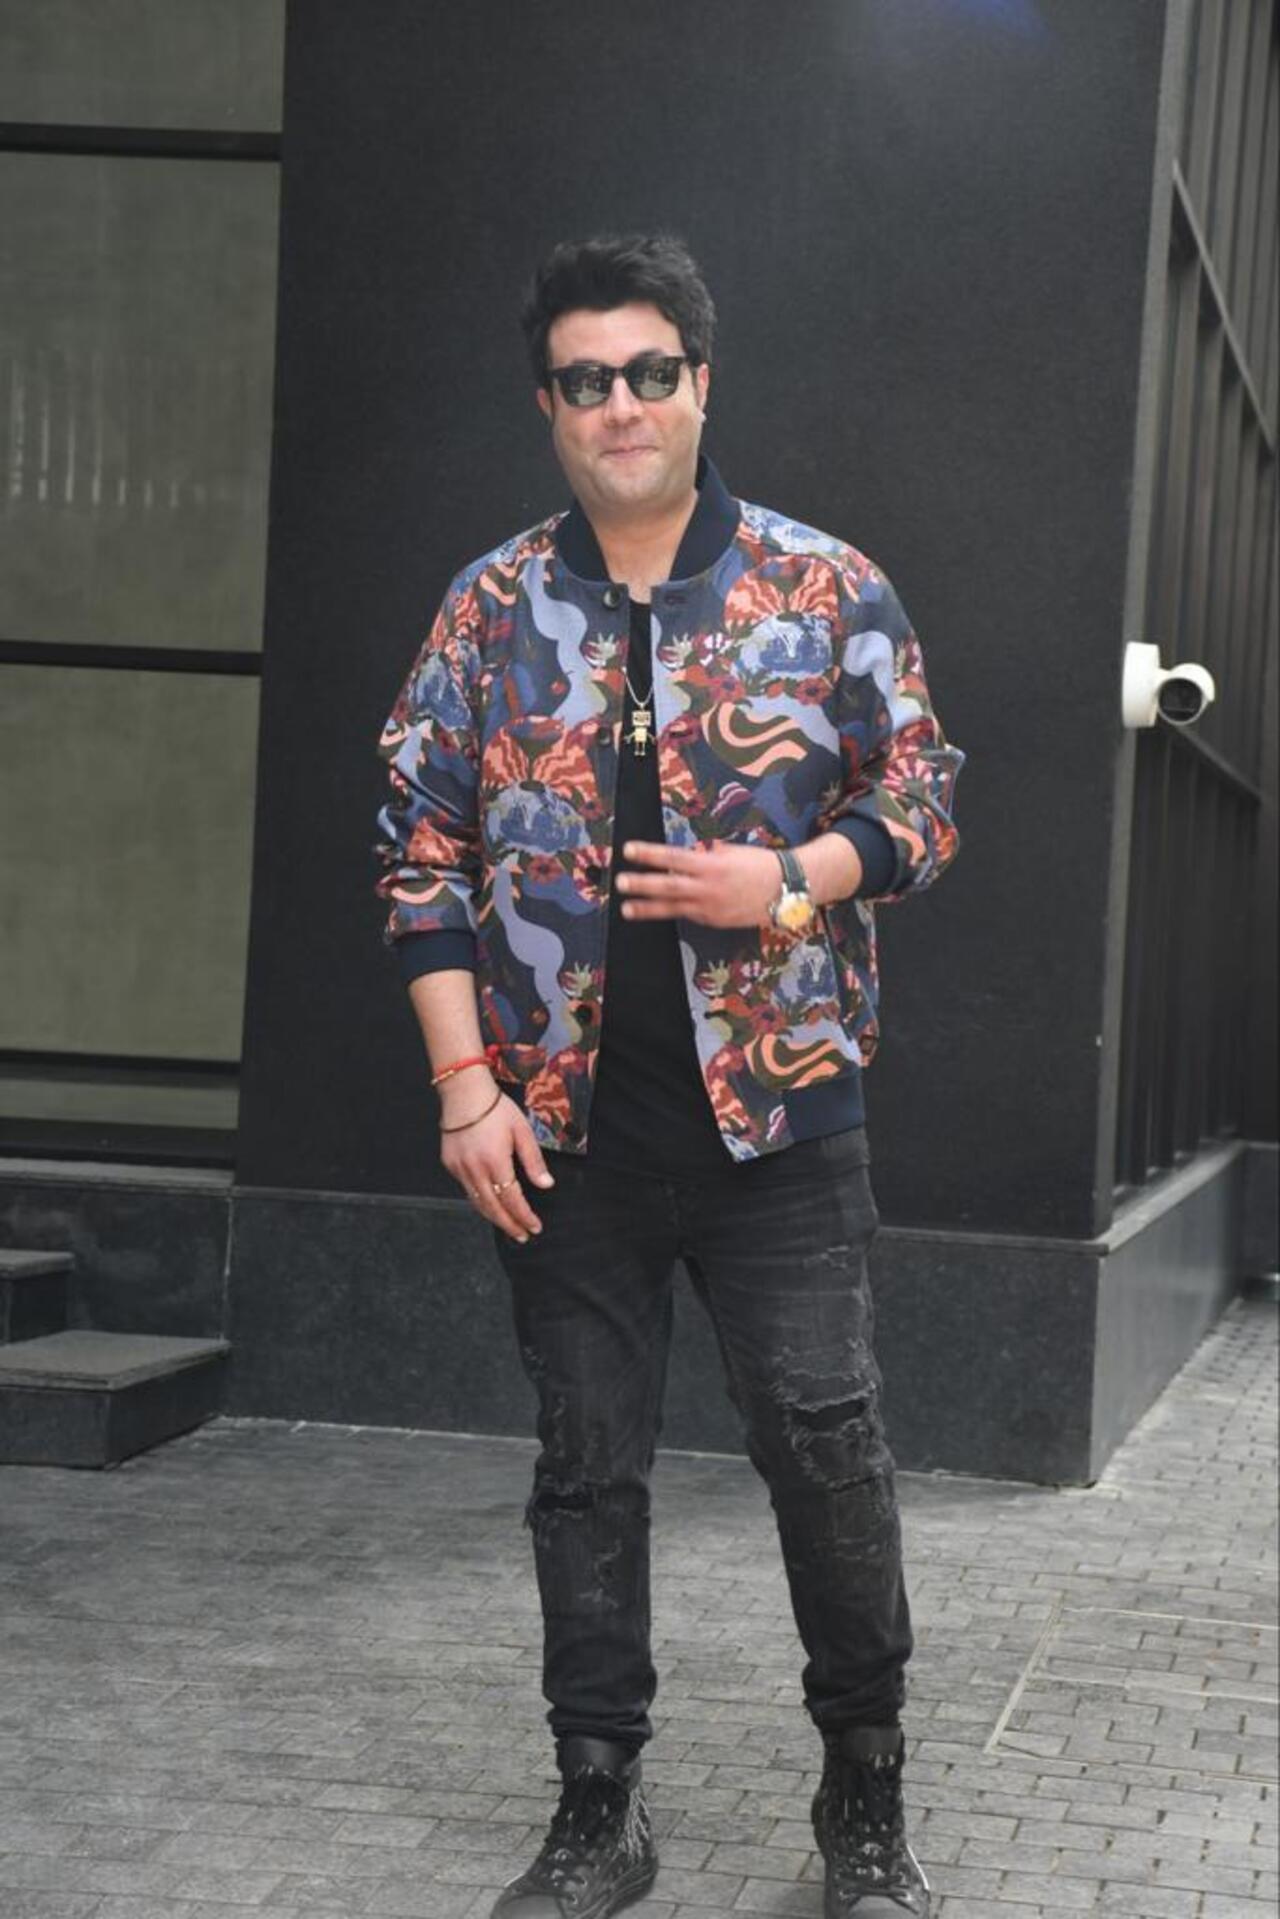 Varun Sharma donned a funky jacket over an all-black outfit as he was clicked in the city